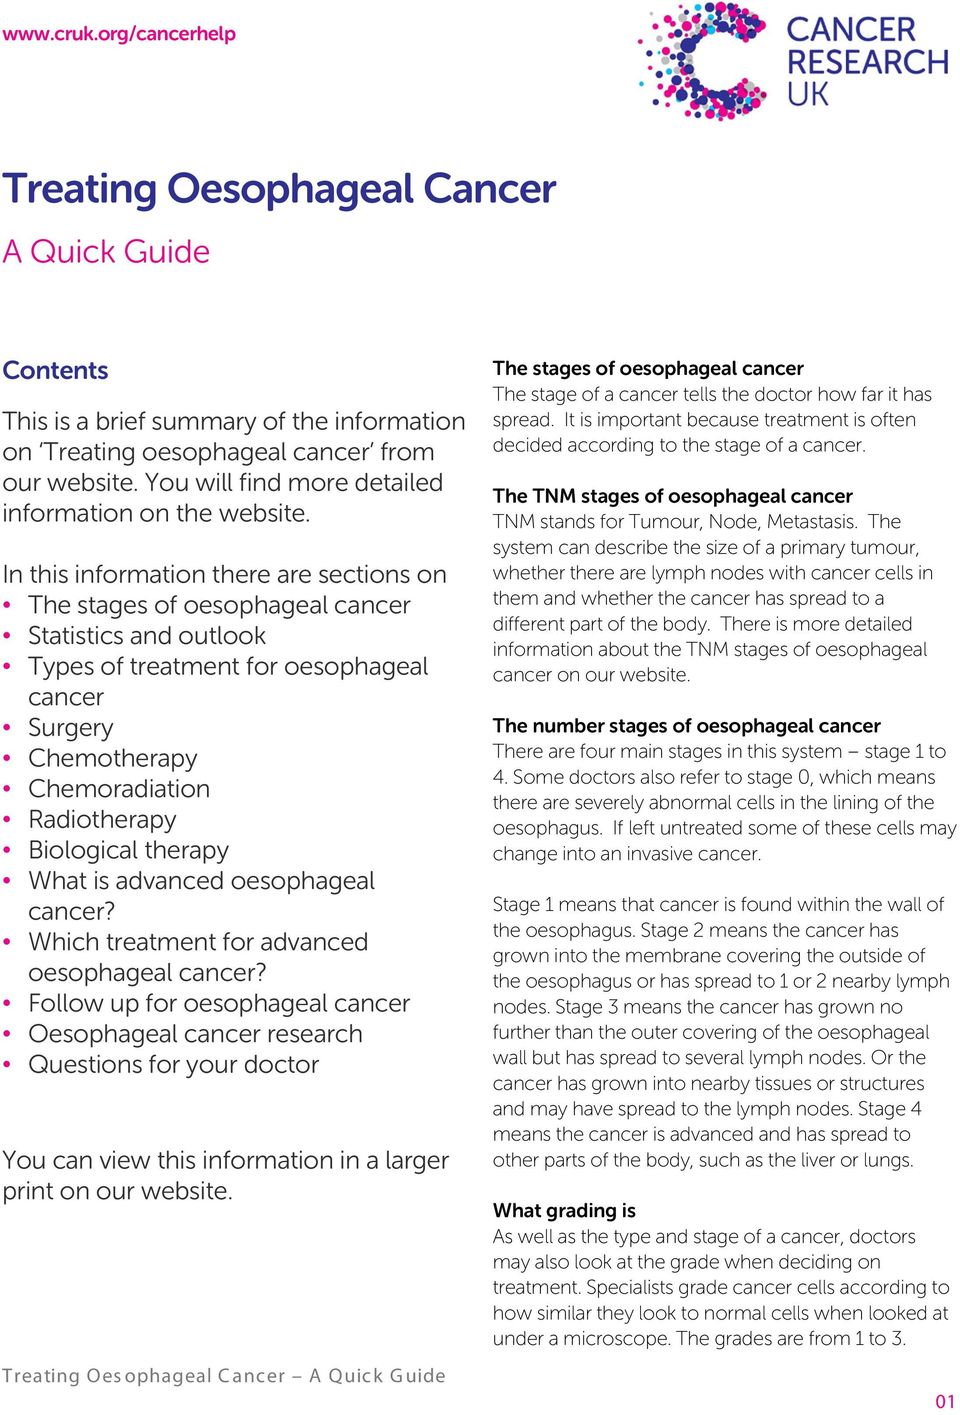 advanced oesophageal cancer? Which treatment for advanced? Follow up for Oesophageal cancer research Questions for your doctor You can view this information in a larger print on our website.